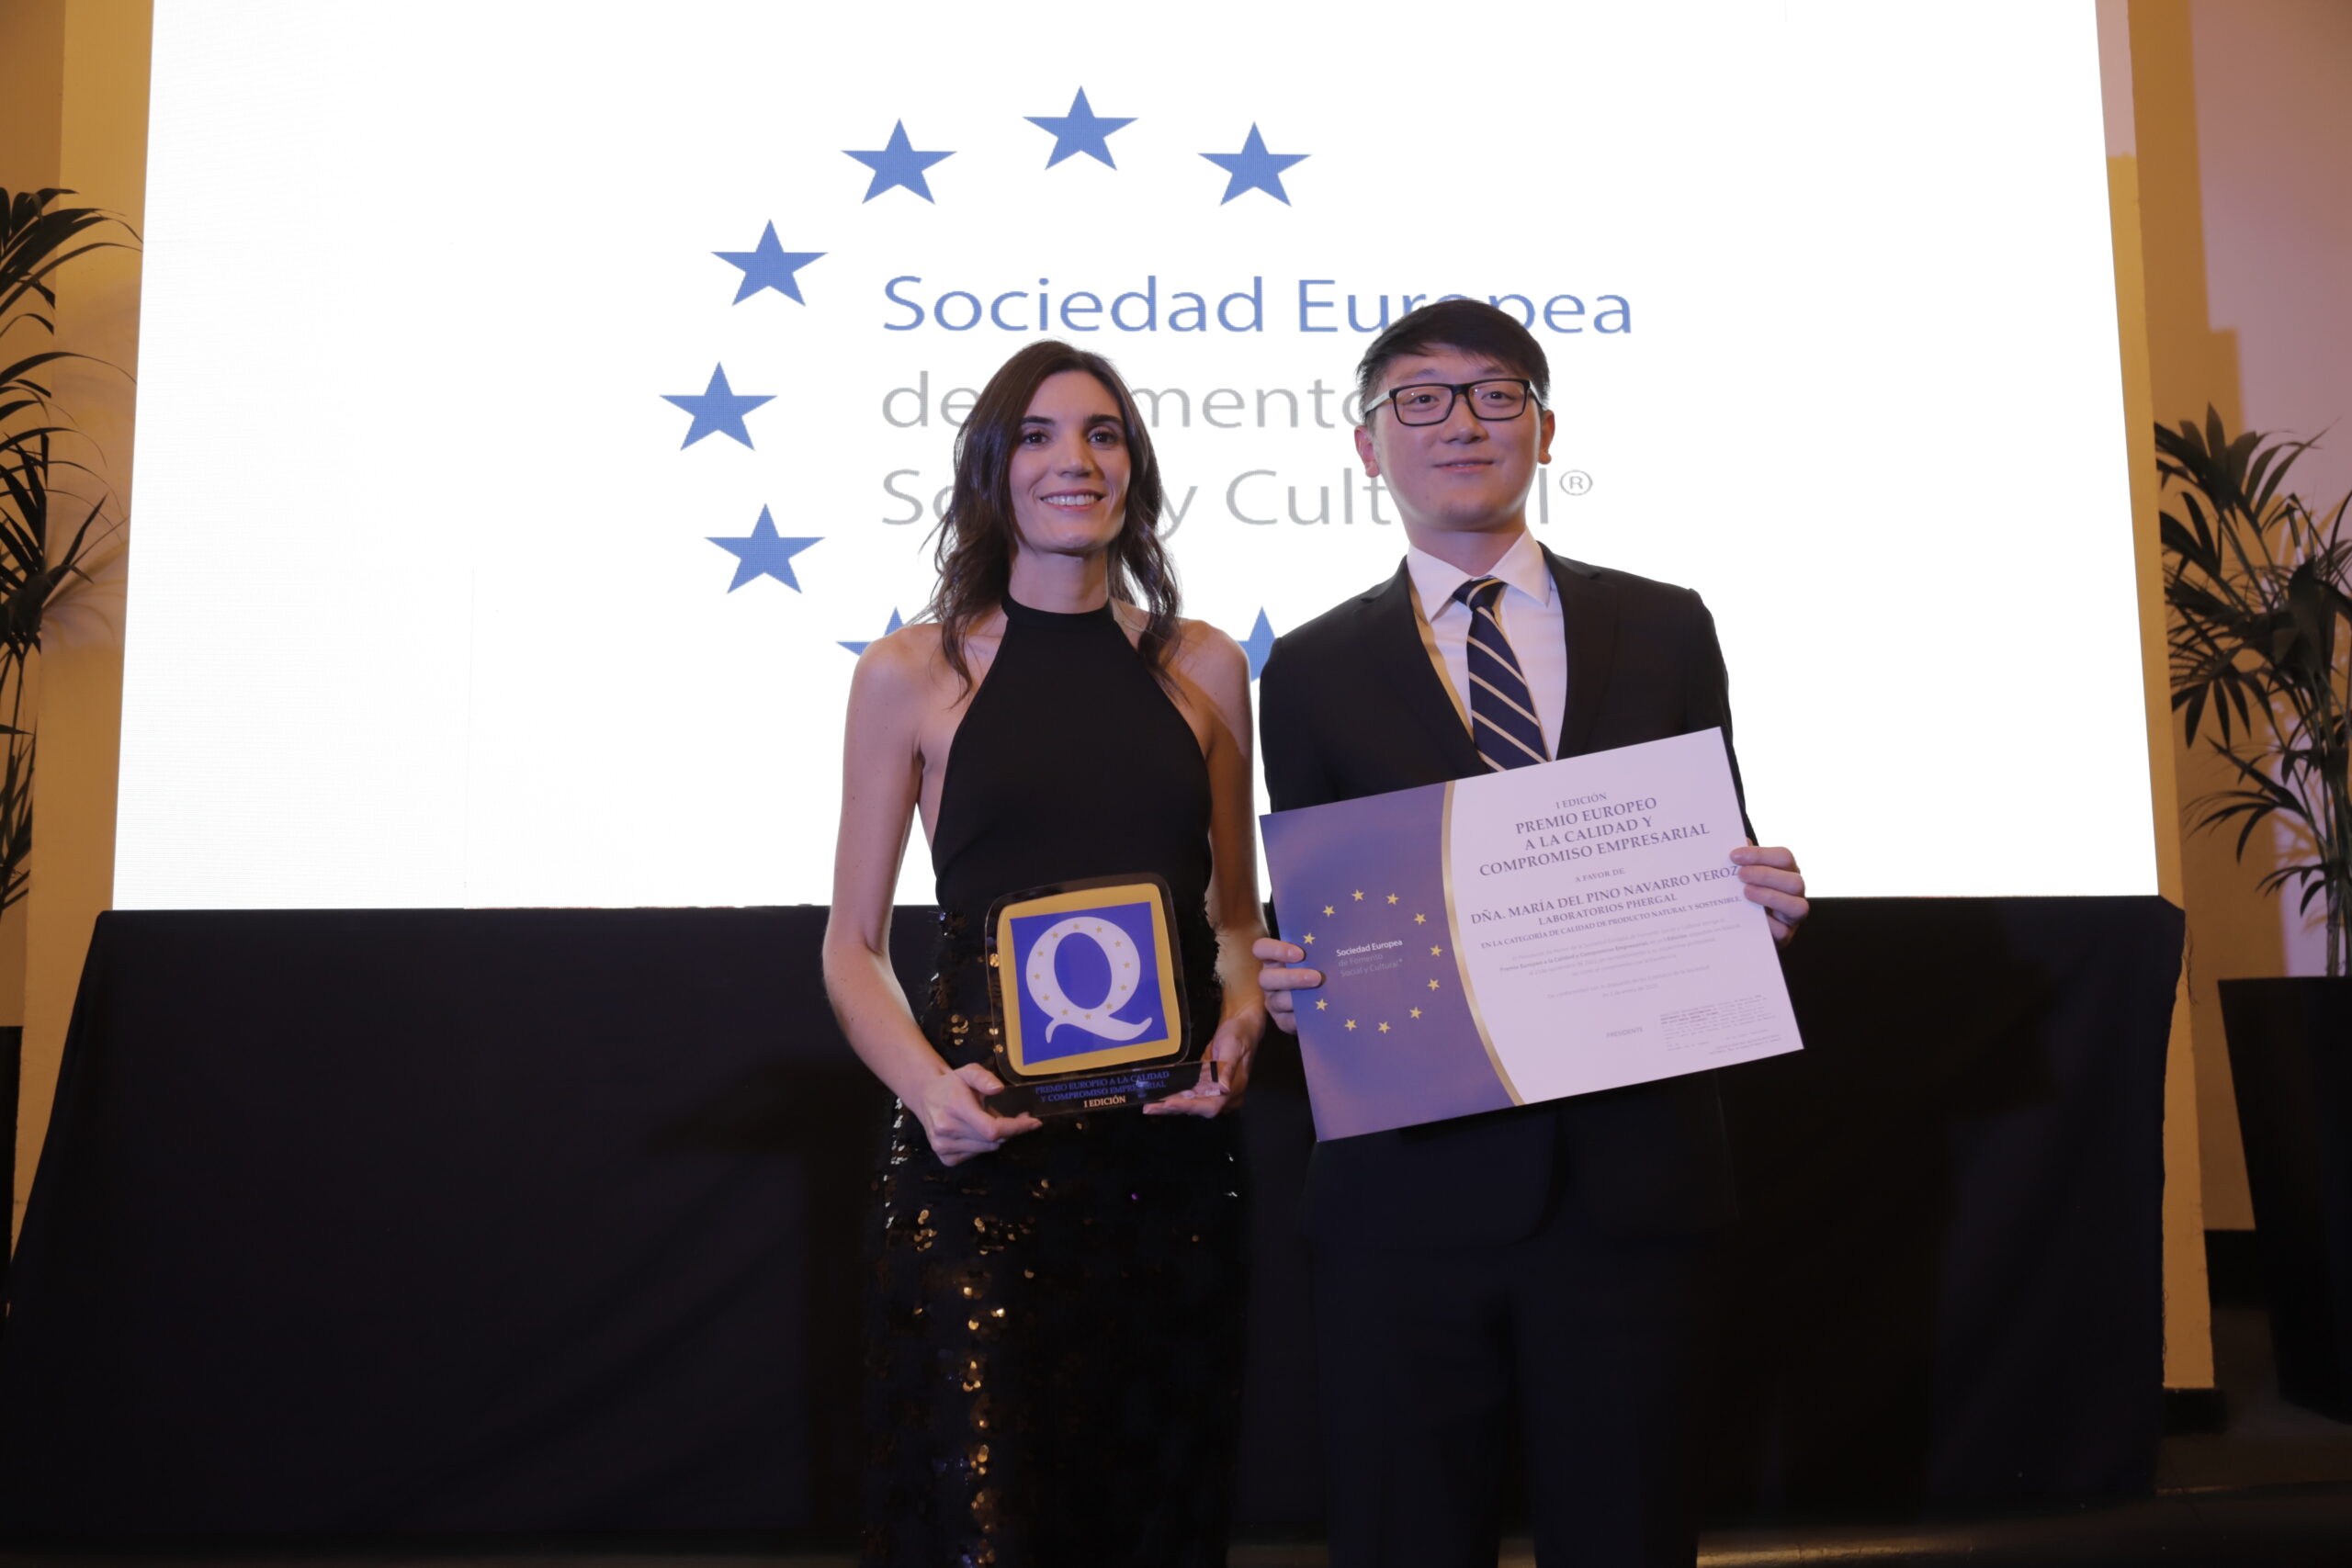 Dr. Tree receives the European Award for Quality and Business Commitment